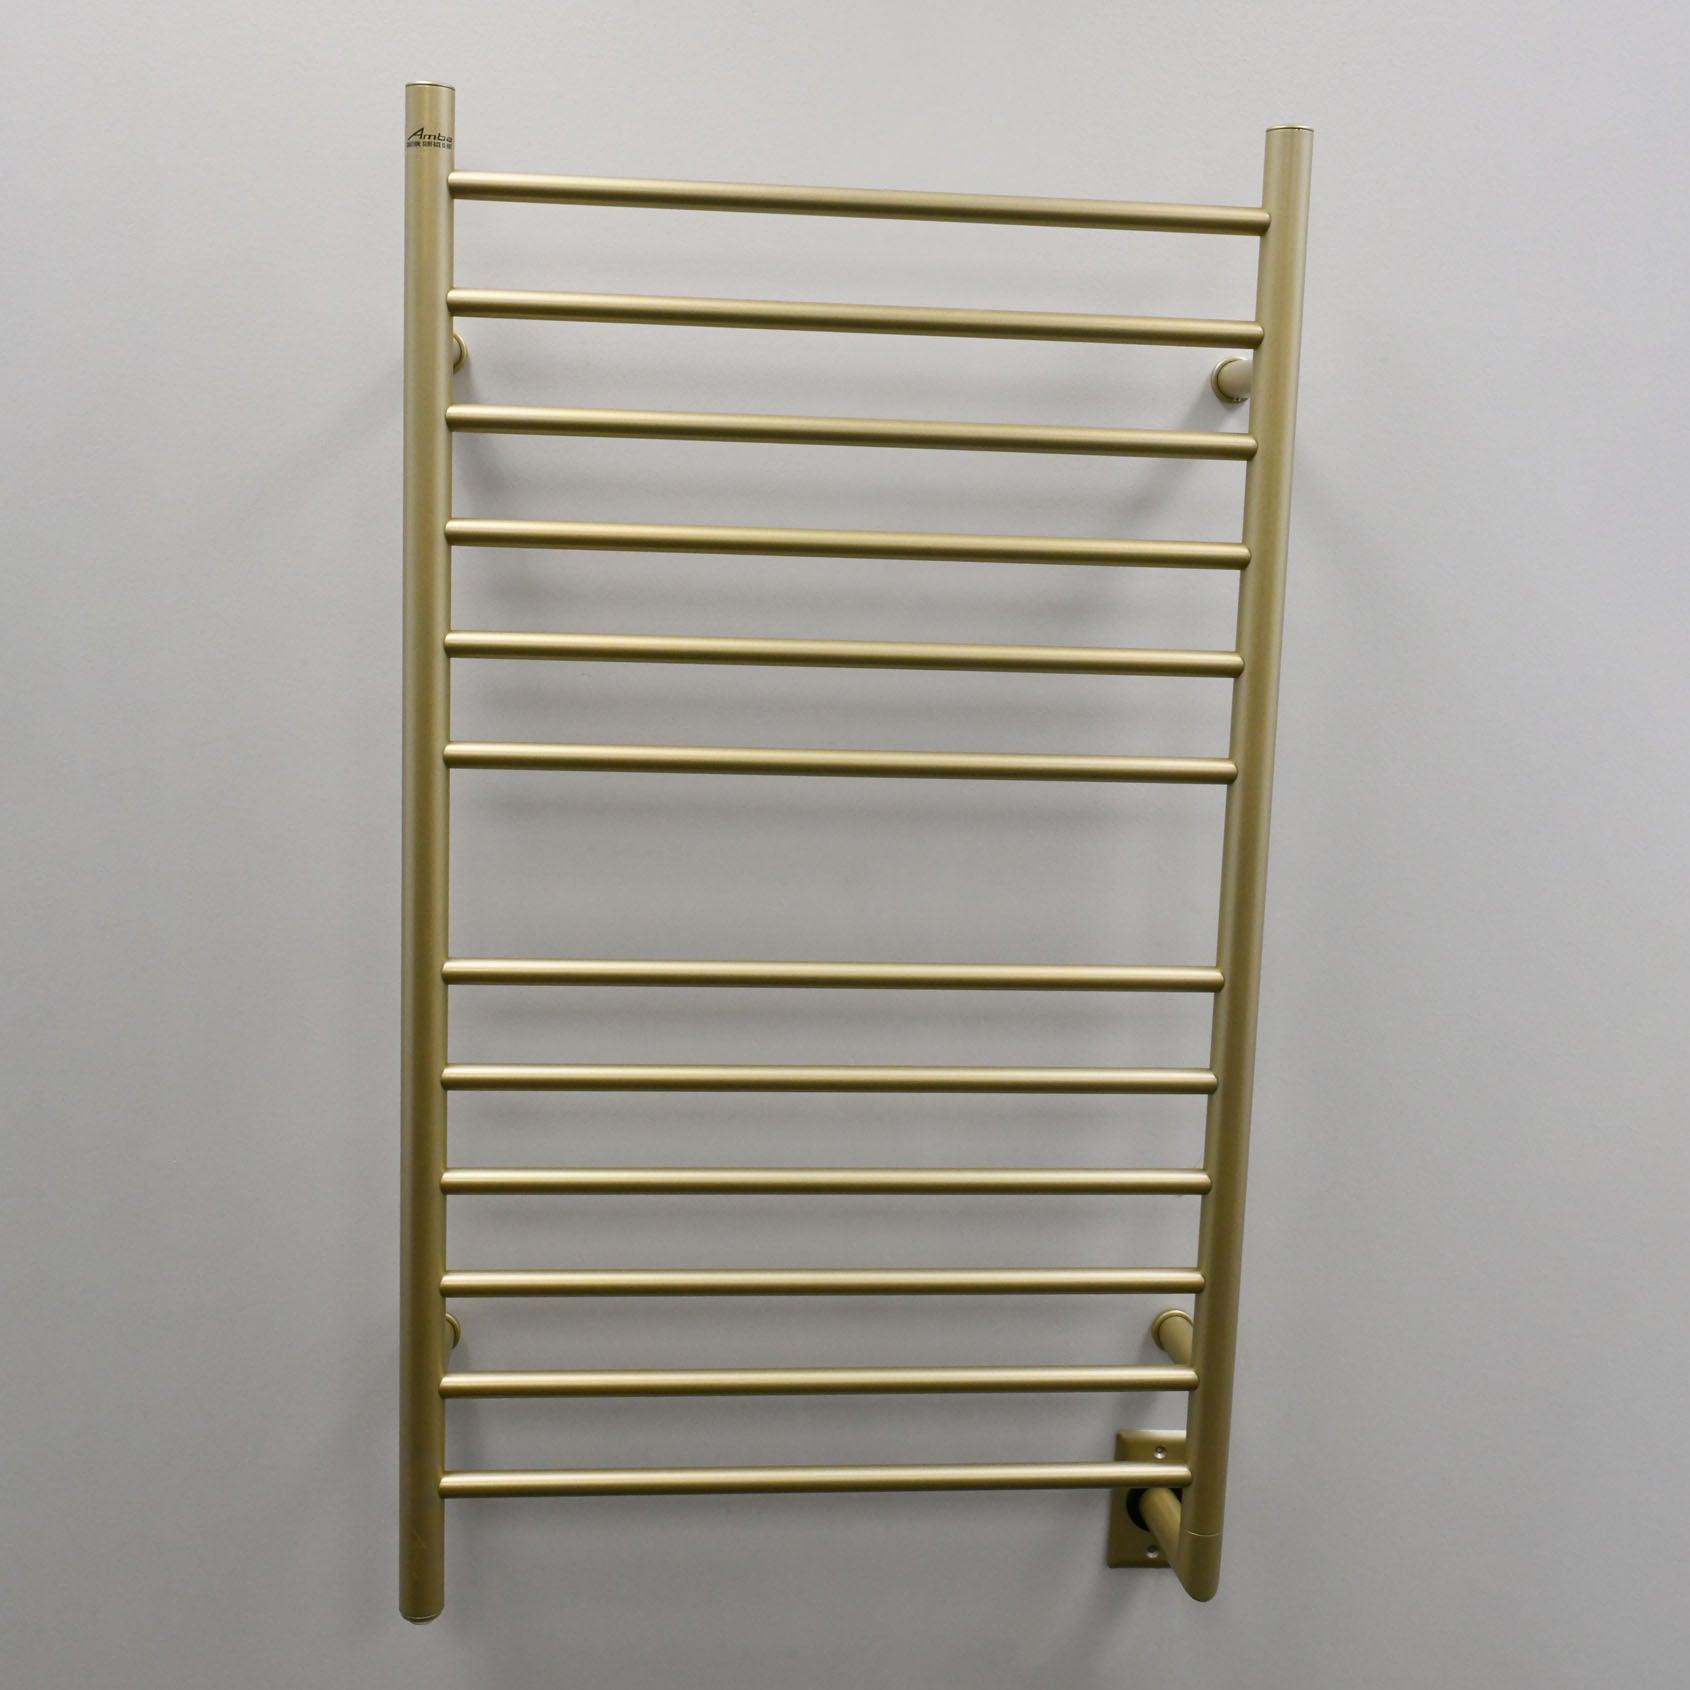 Amba Radiant Large Hardwired Straight Towel Warmer - 23.6"w x 41.3"h - Only Towel Warmers